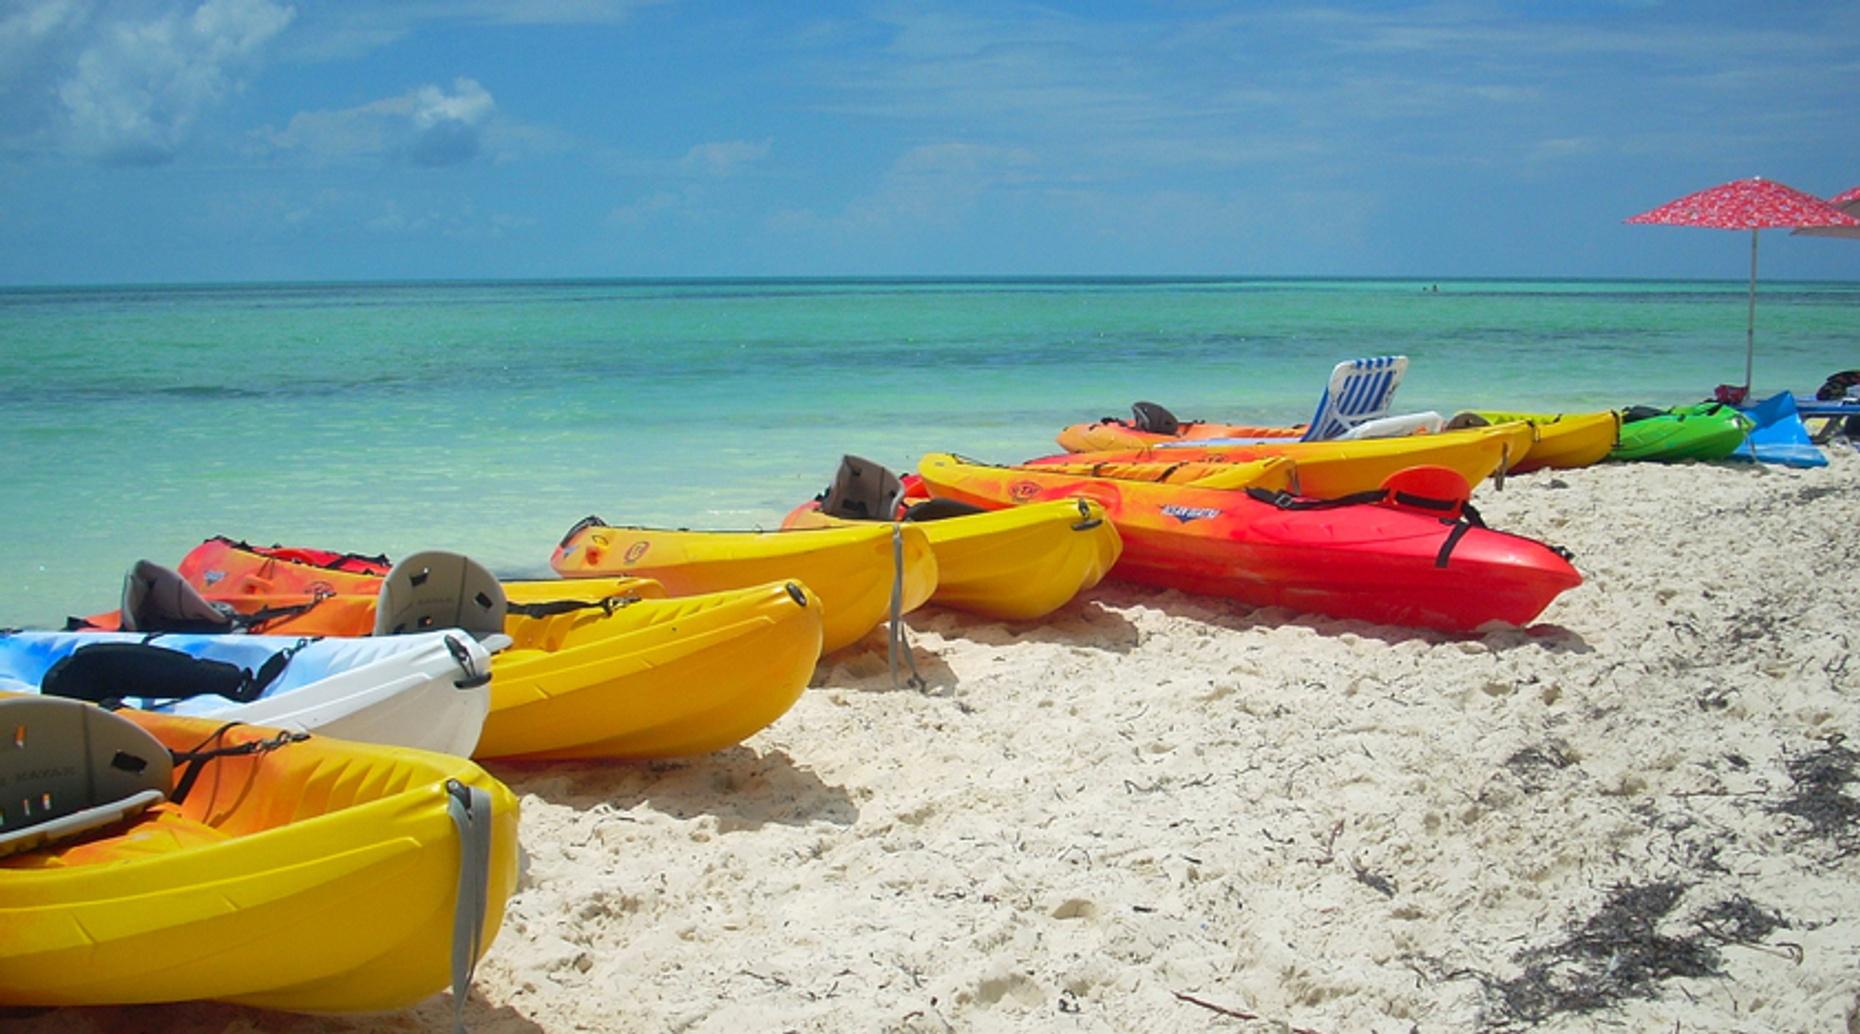 Two Hour Rental (Kayaks and Paddleboards)